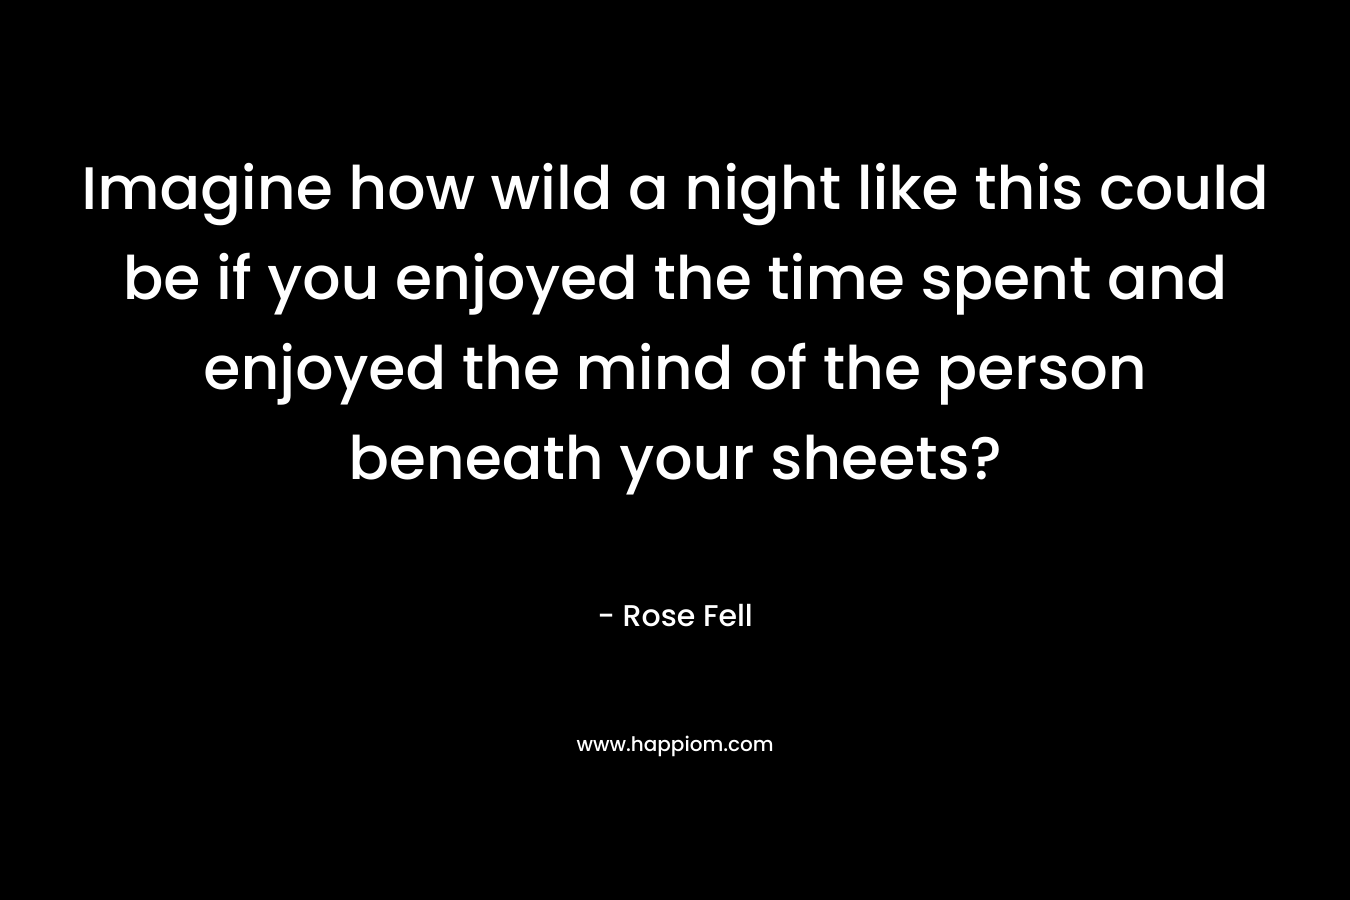 Imagine how wild a night like this could be if you enjoyed the time spent and enjoyed the mind of the person beneath your sheets?